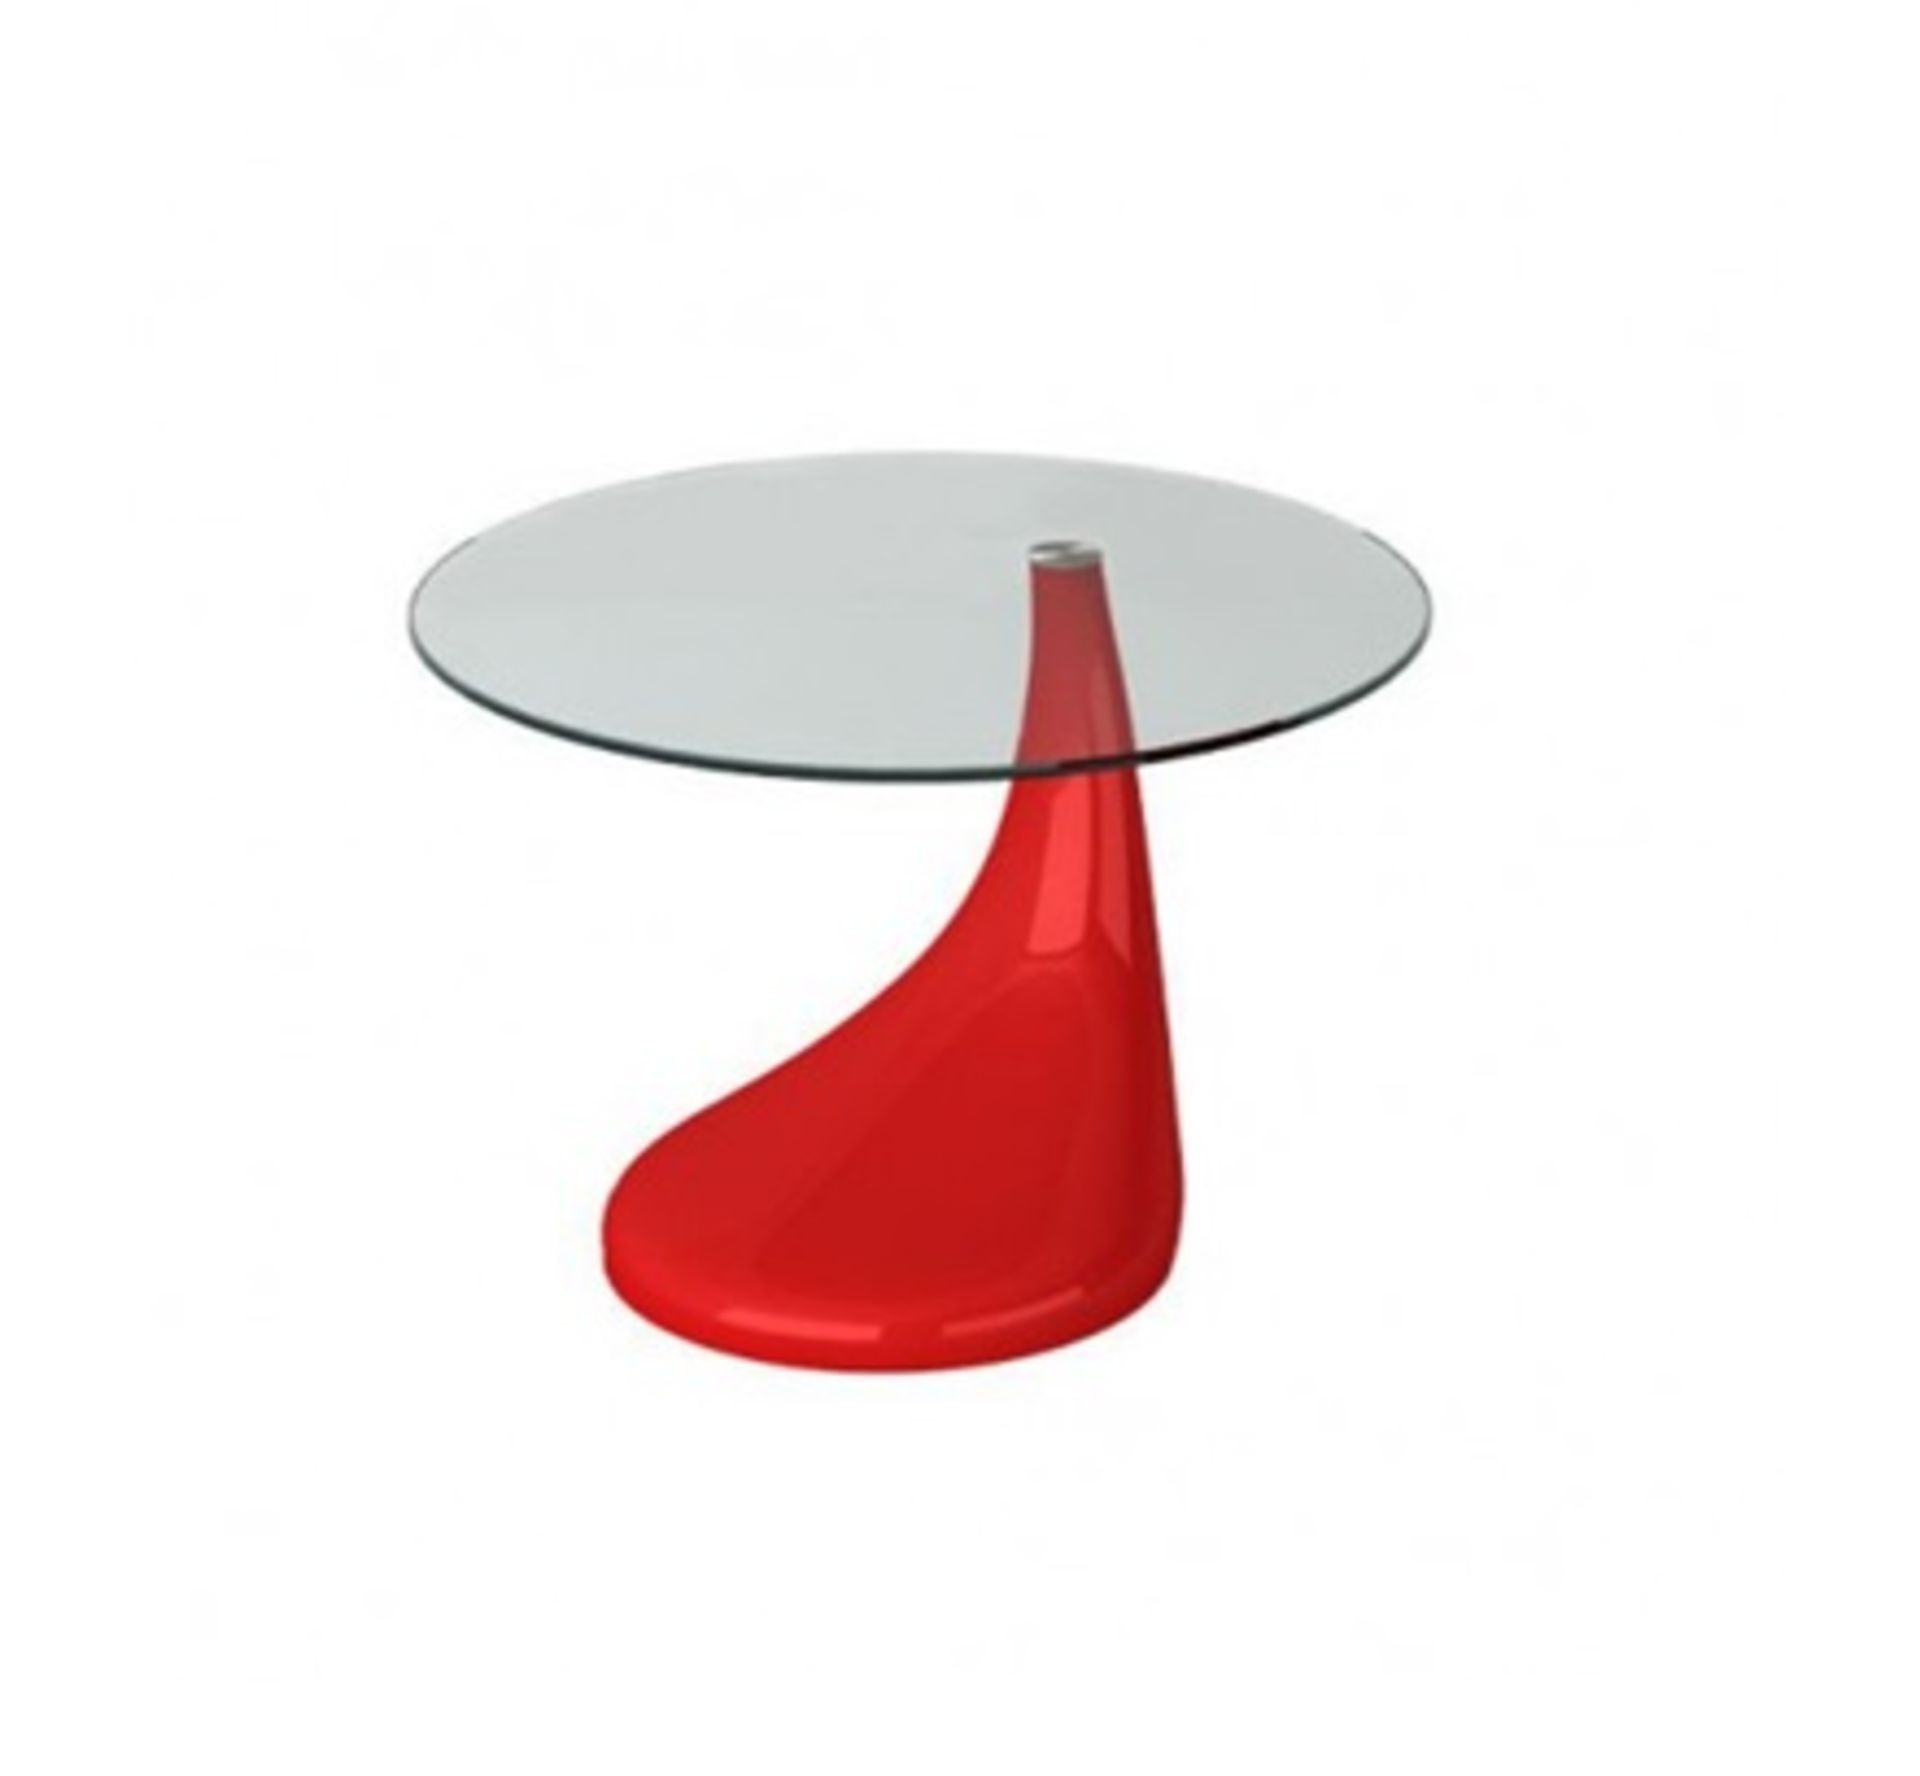 Contemporary High Gloss Glass Coffee / Side Table in Red - Ref CTB415/RED (Brand New & Boxed)